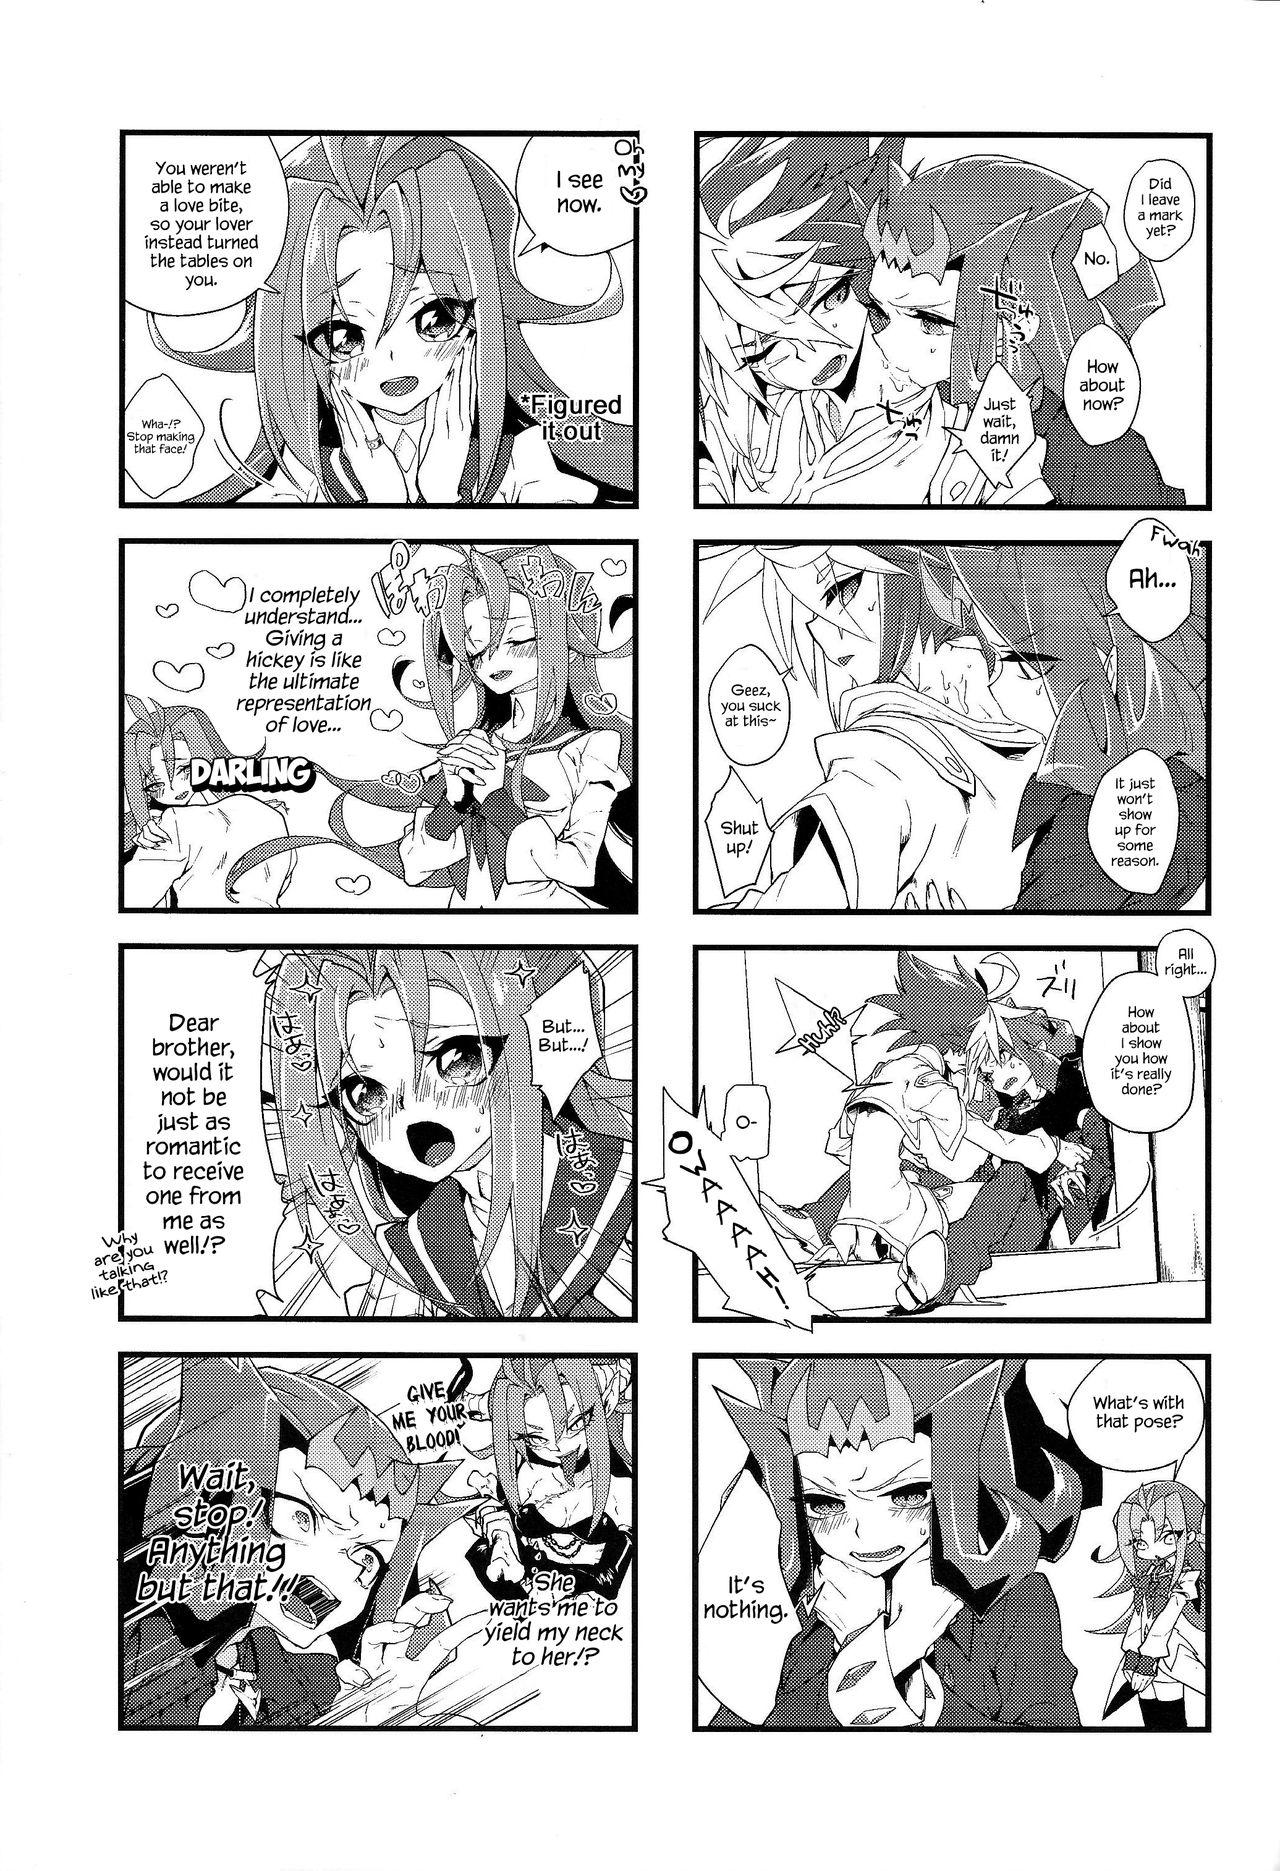 Orgame Love Bite - Yu-gi-oh zexal Eating Pussy - Page 2